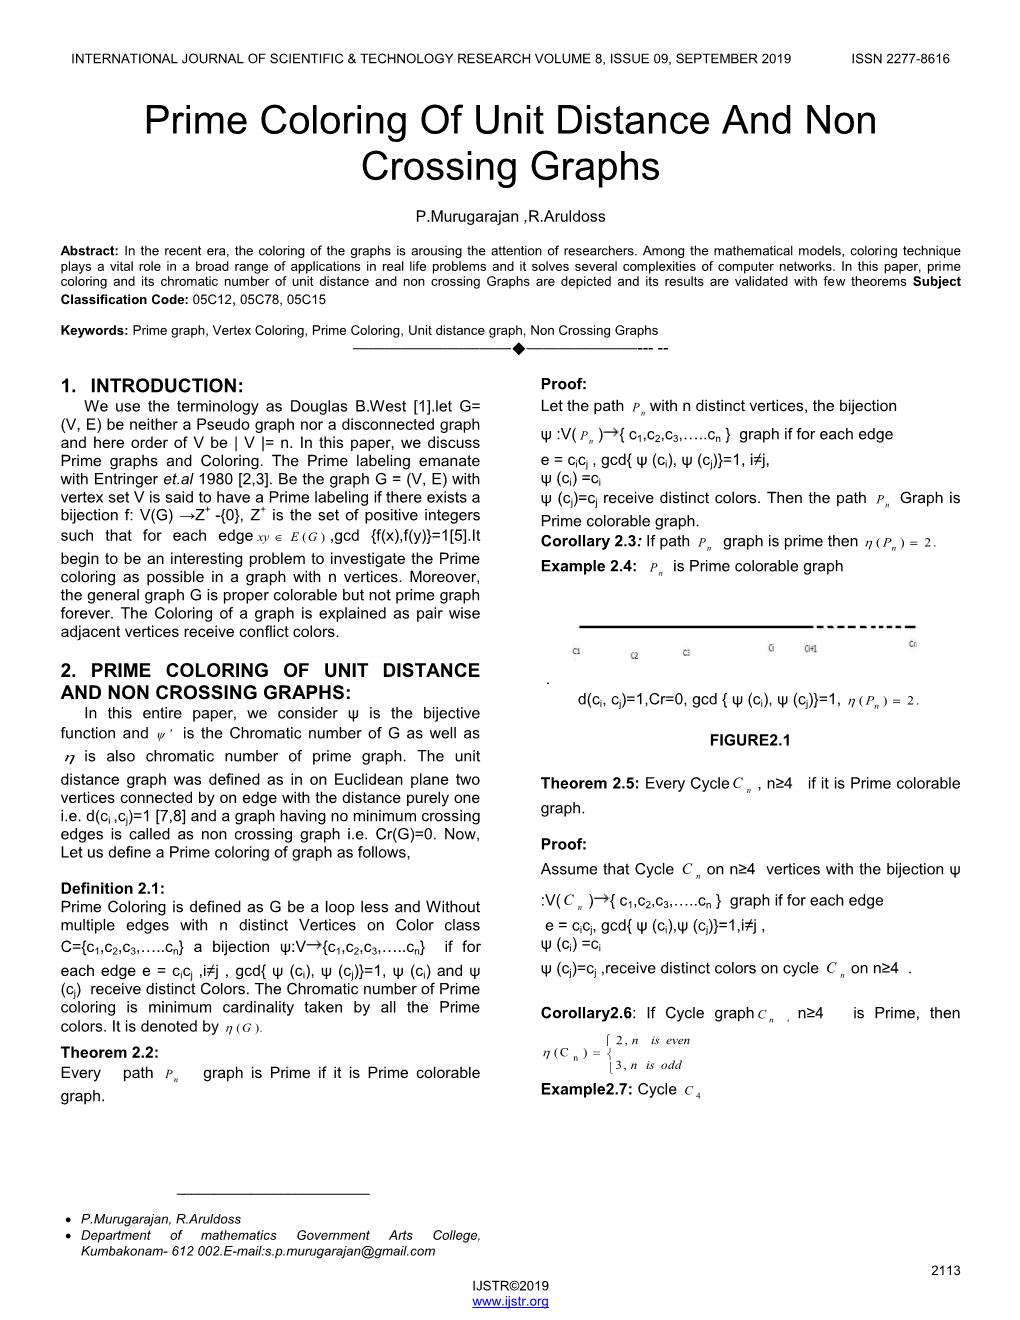 Prime Coloring of Unit Distance and Non Crossing Graphs